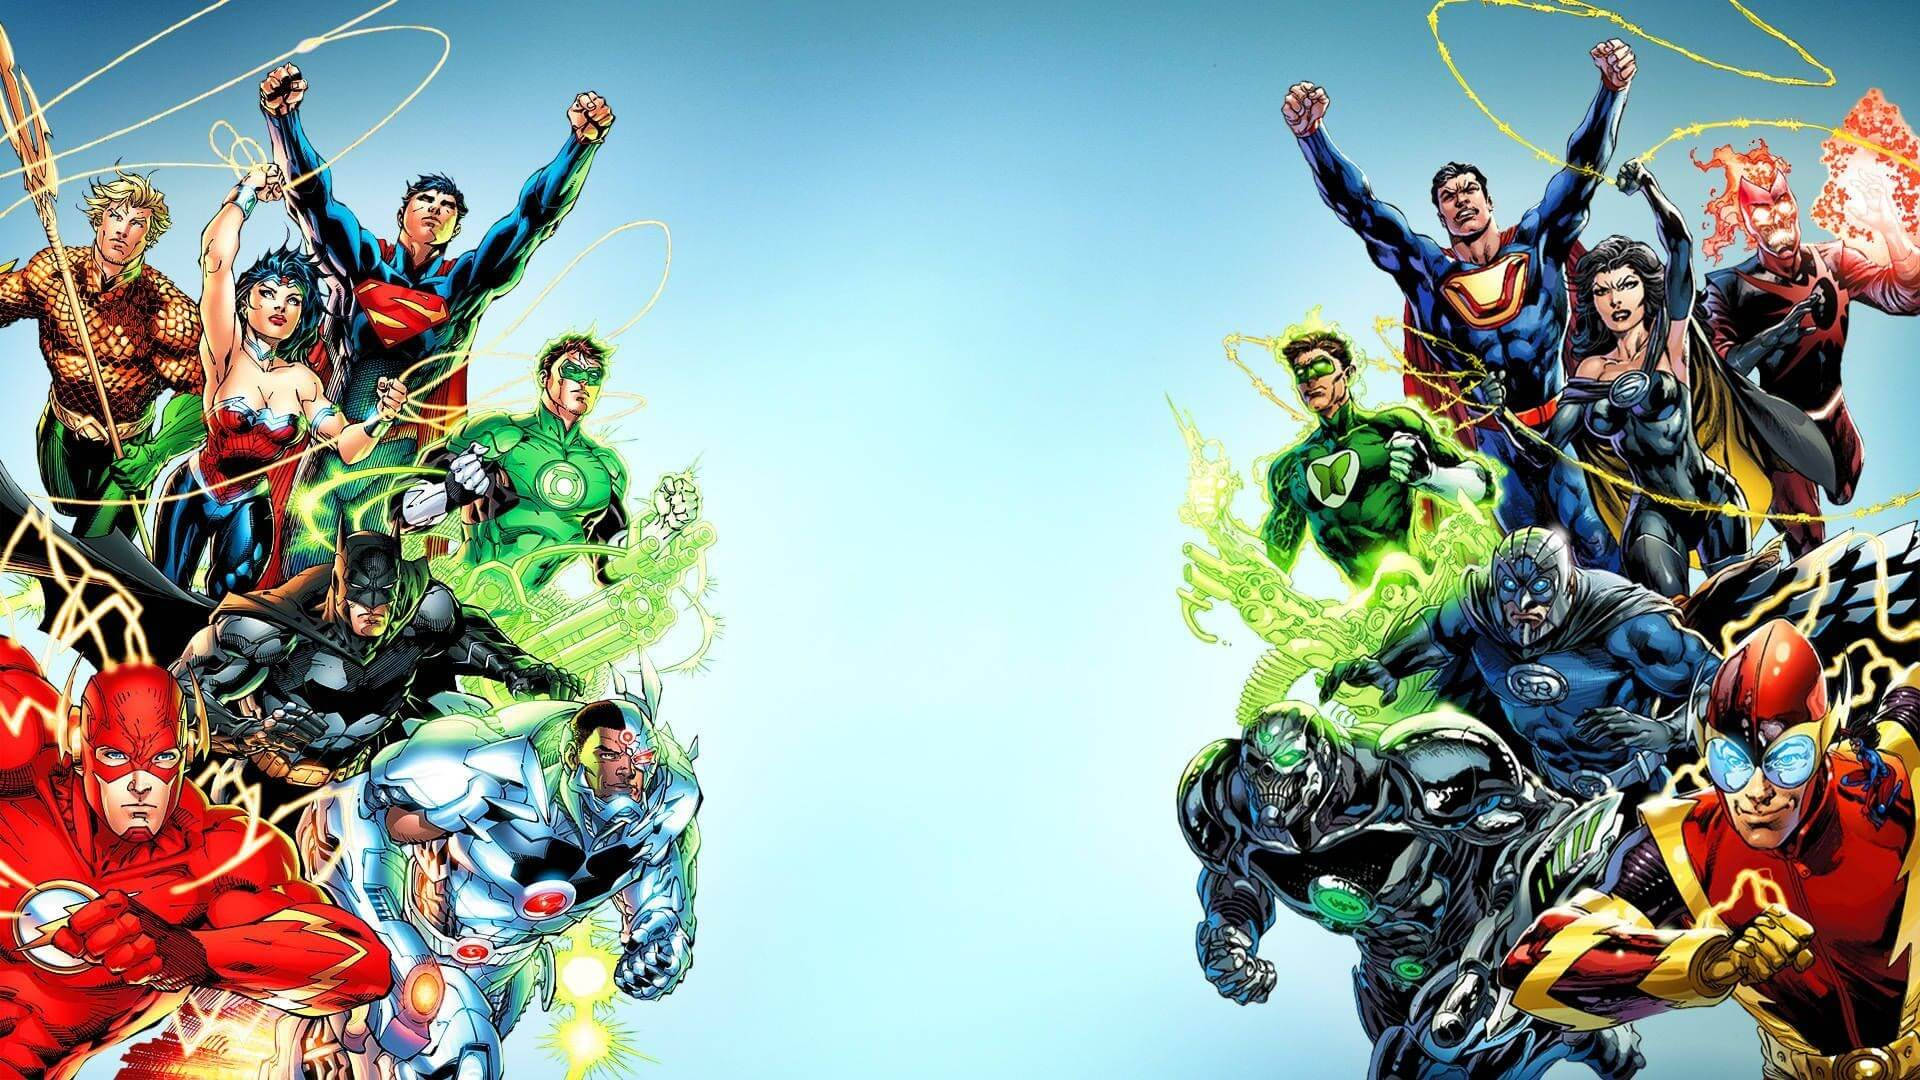 Image  A Collection of DC Superheroes Assemble Wallpaper